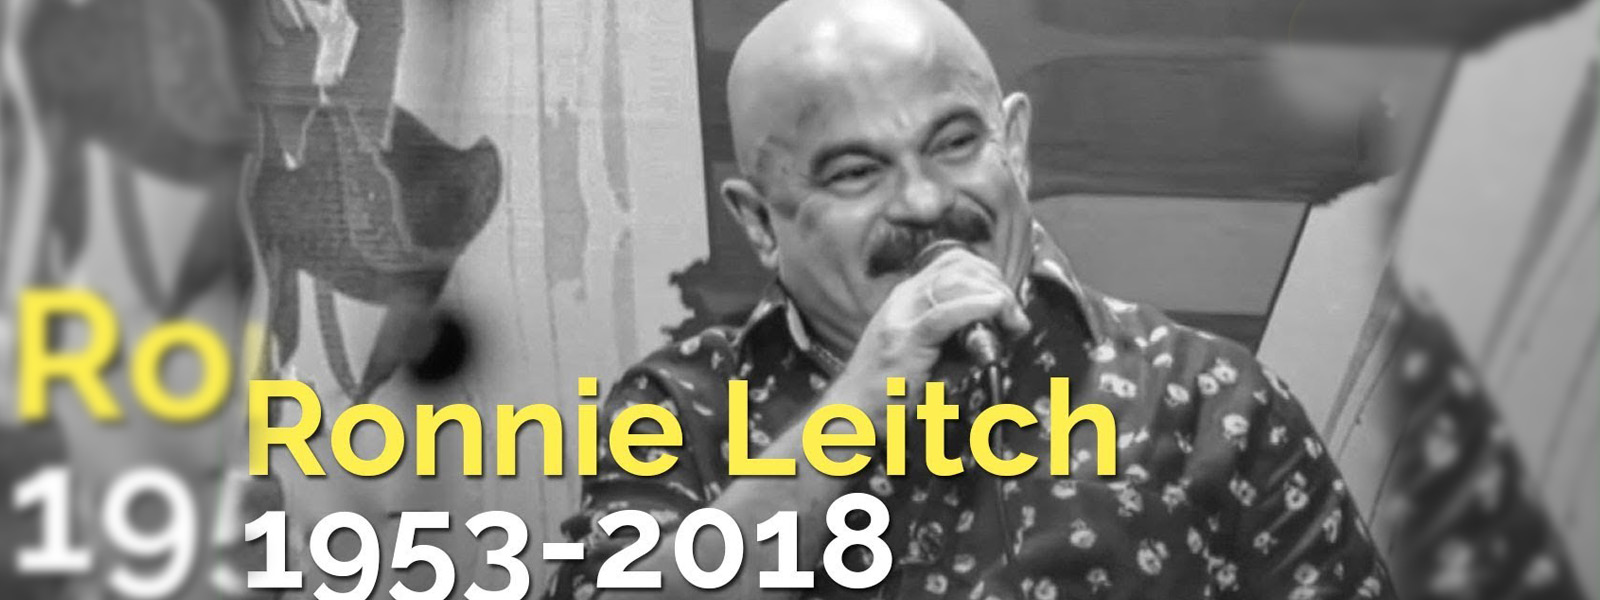 Final Rites of Ronnie Leitch tomorrow in Colombo